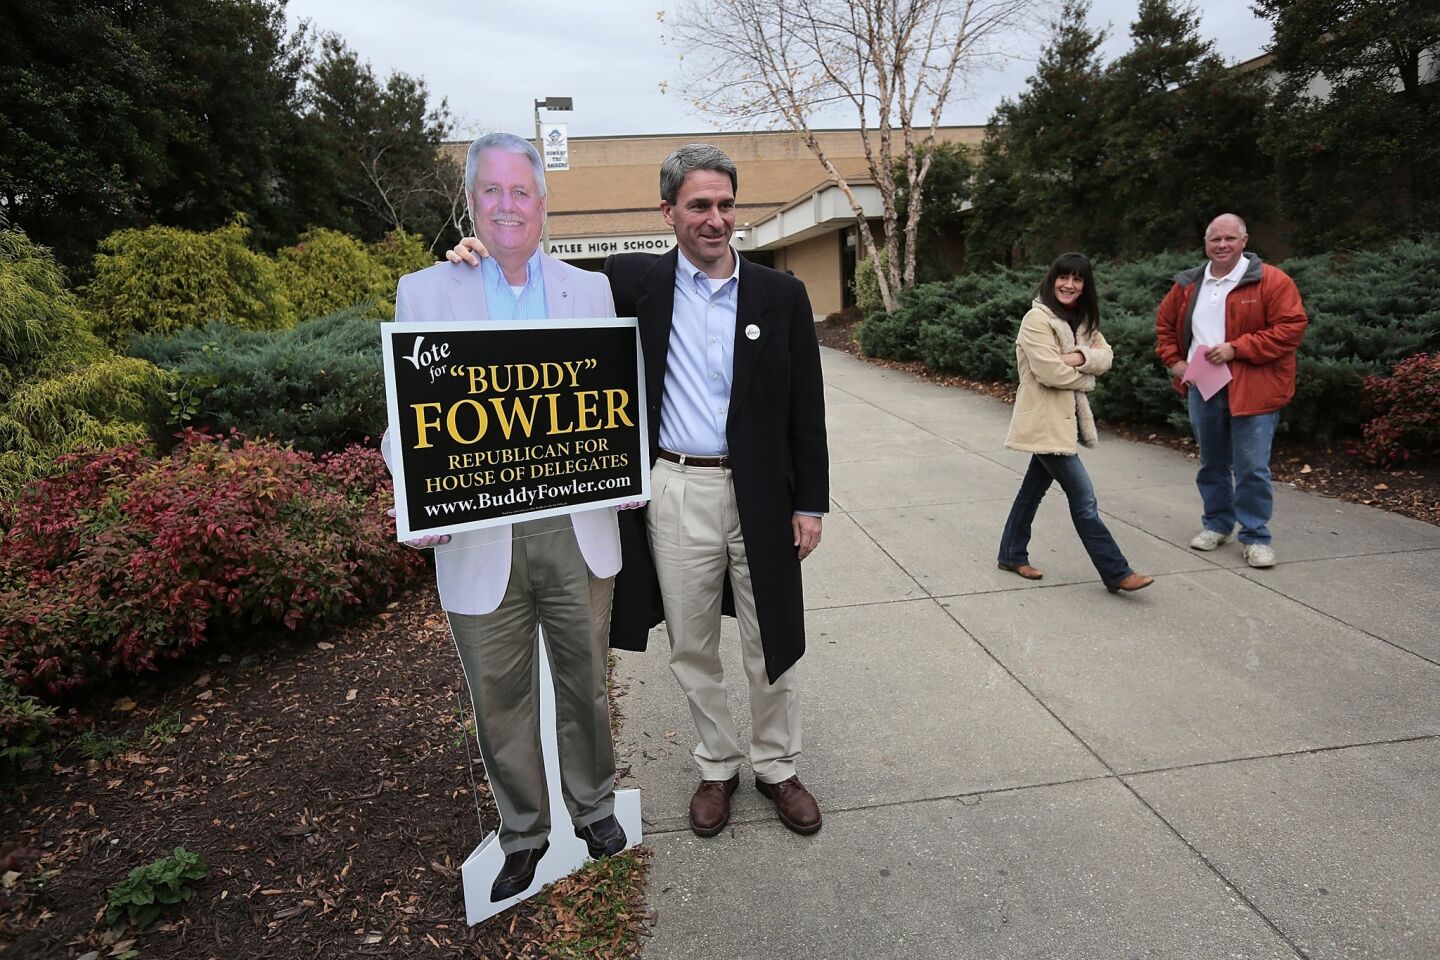 Republican gubernatorial candidate Ken Cuccinelli poses with a cardboard cutout of Virginia House of Delegates candidate Buddy Fowler while greeting voters in Mechanicsville, Va. Cuccinelli lost. Fowler won.